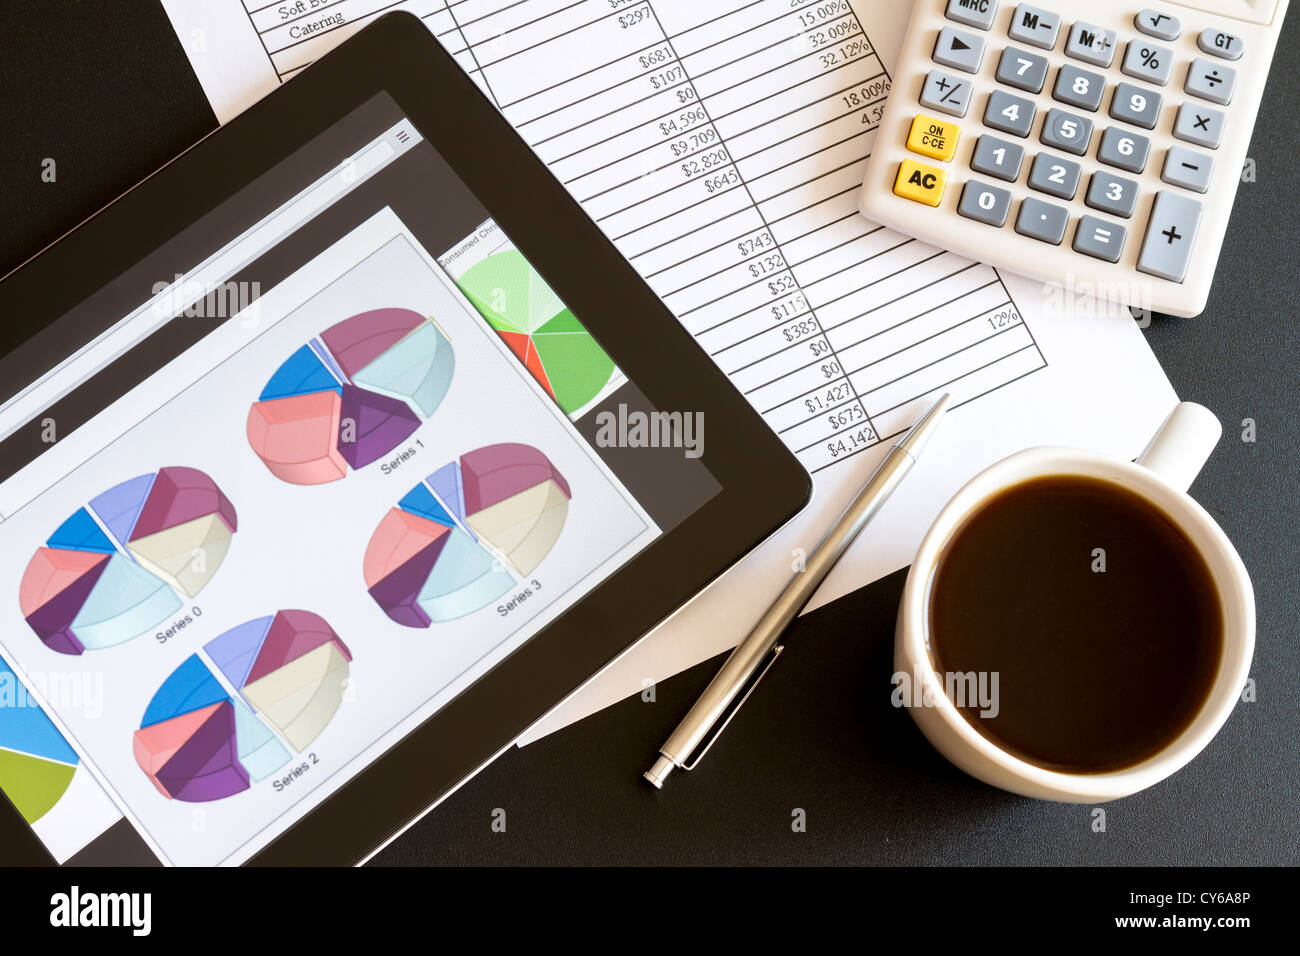 Modern workplace with digital tablet showing charts and diagram on screen, coffee, pen and paper with numbers. Stock Photo